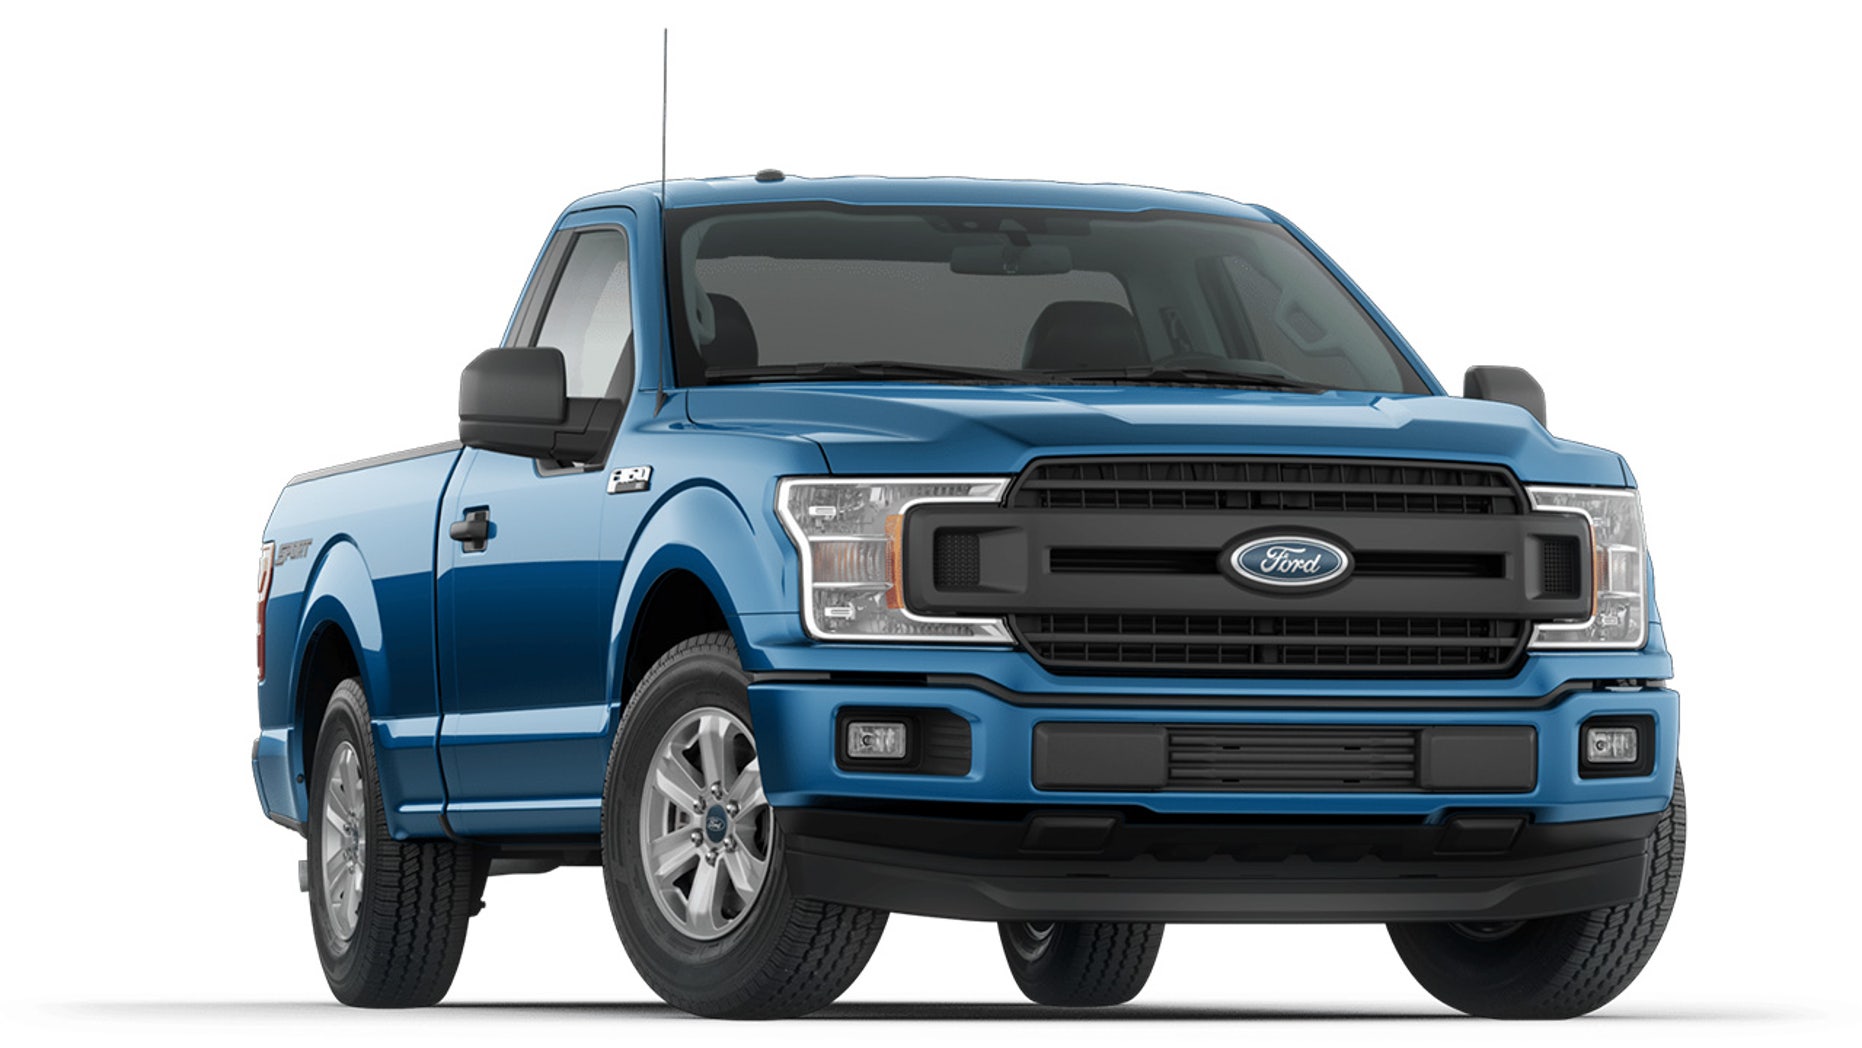 725 Hp Ford F 150 On Sale For Under 40000 Fox News